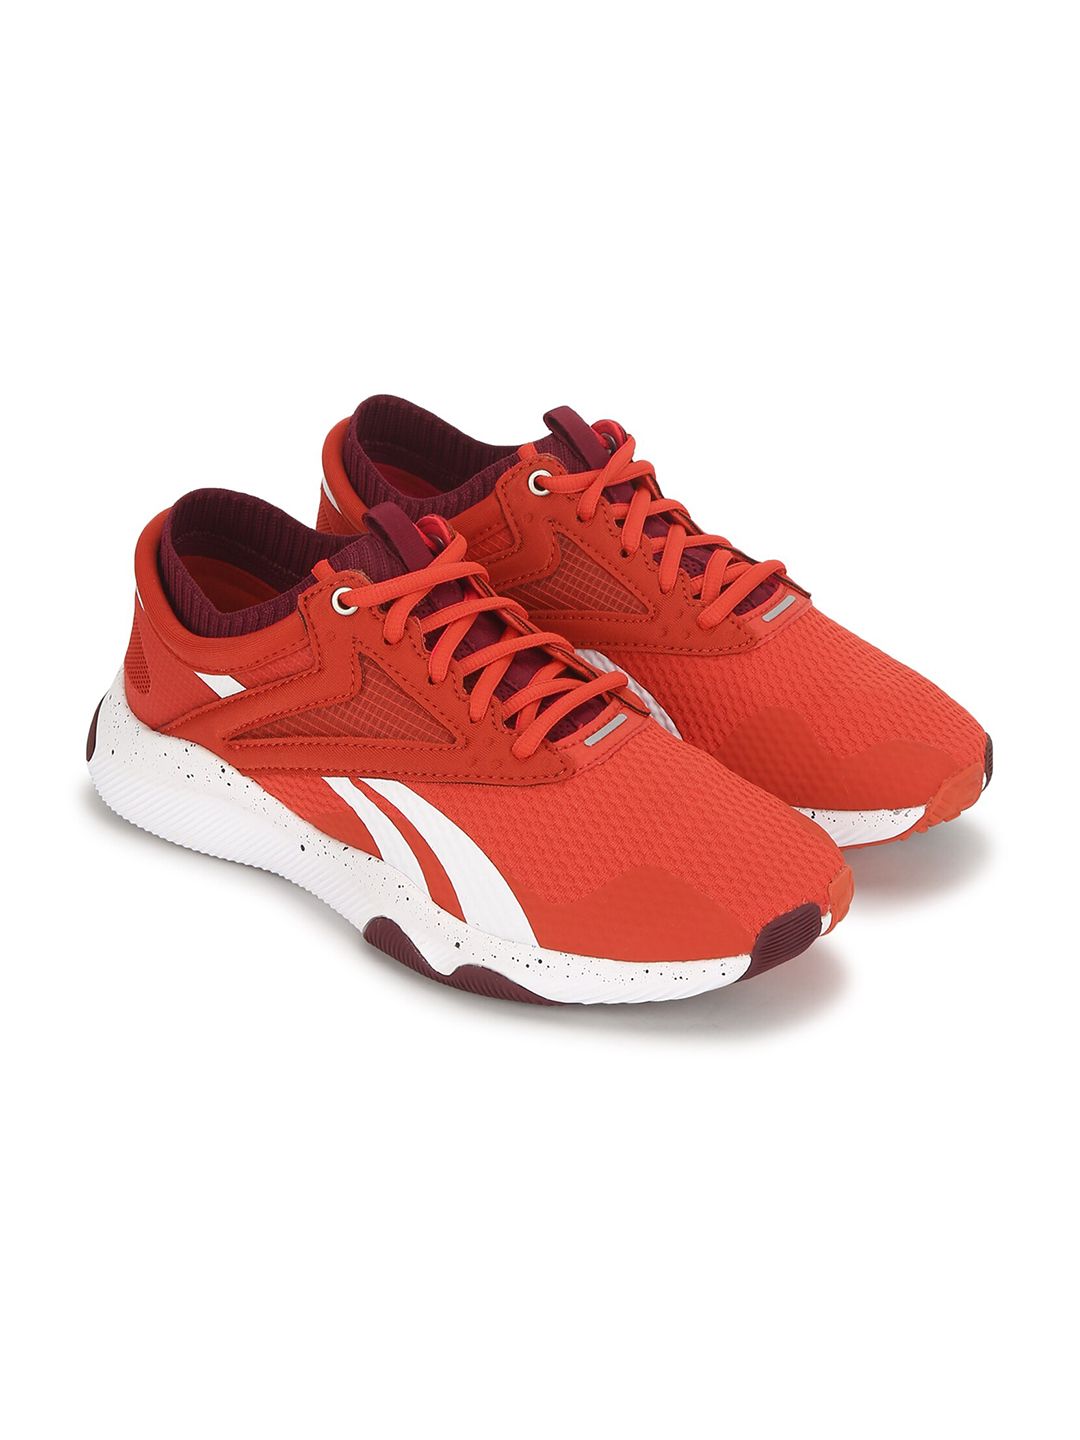 Reebok Women Red & White HIIT TR Training Shoes Price in India